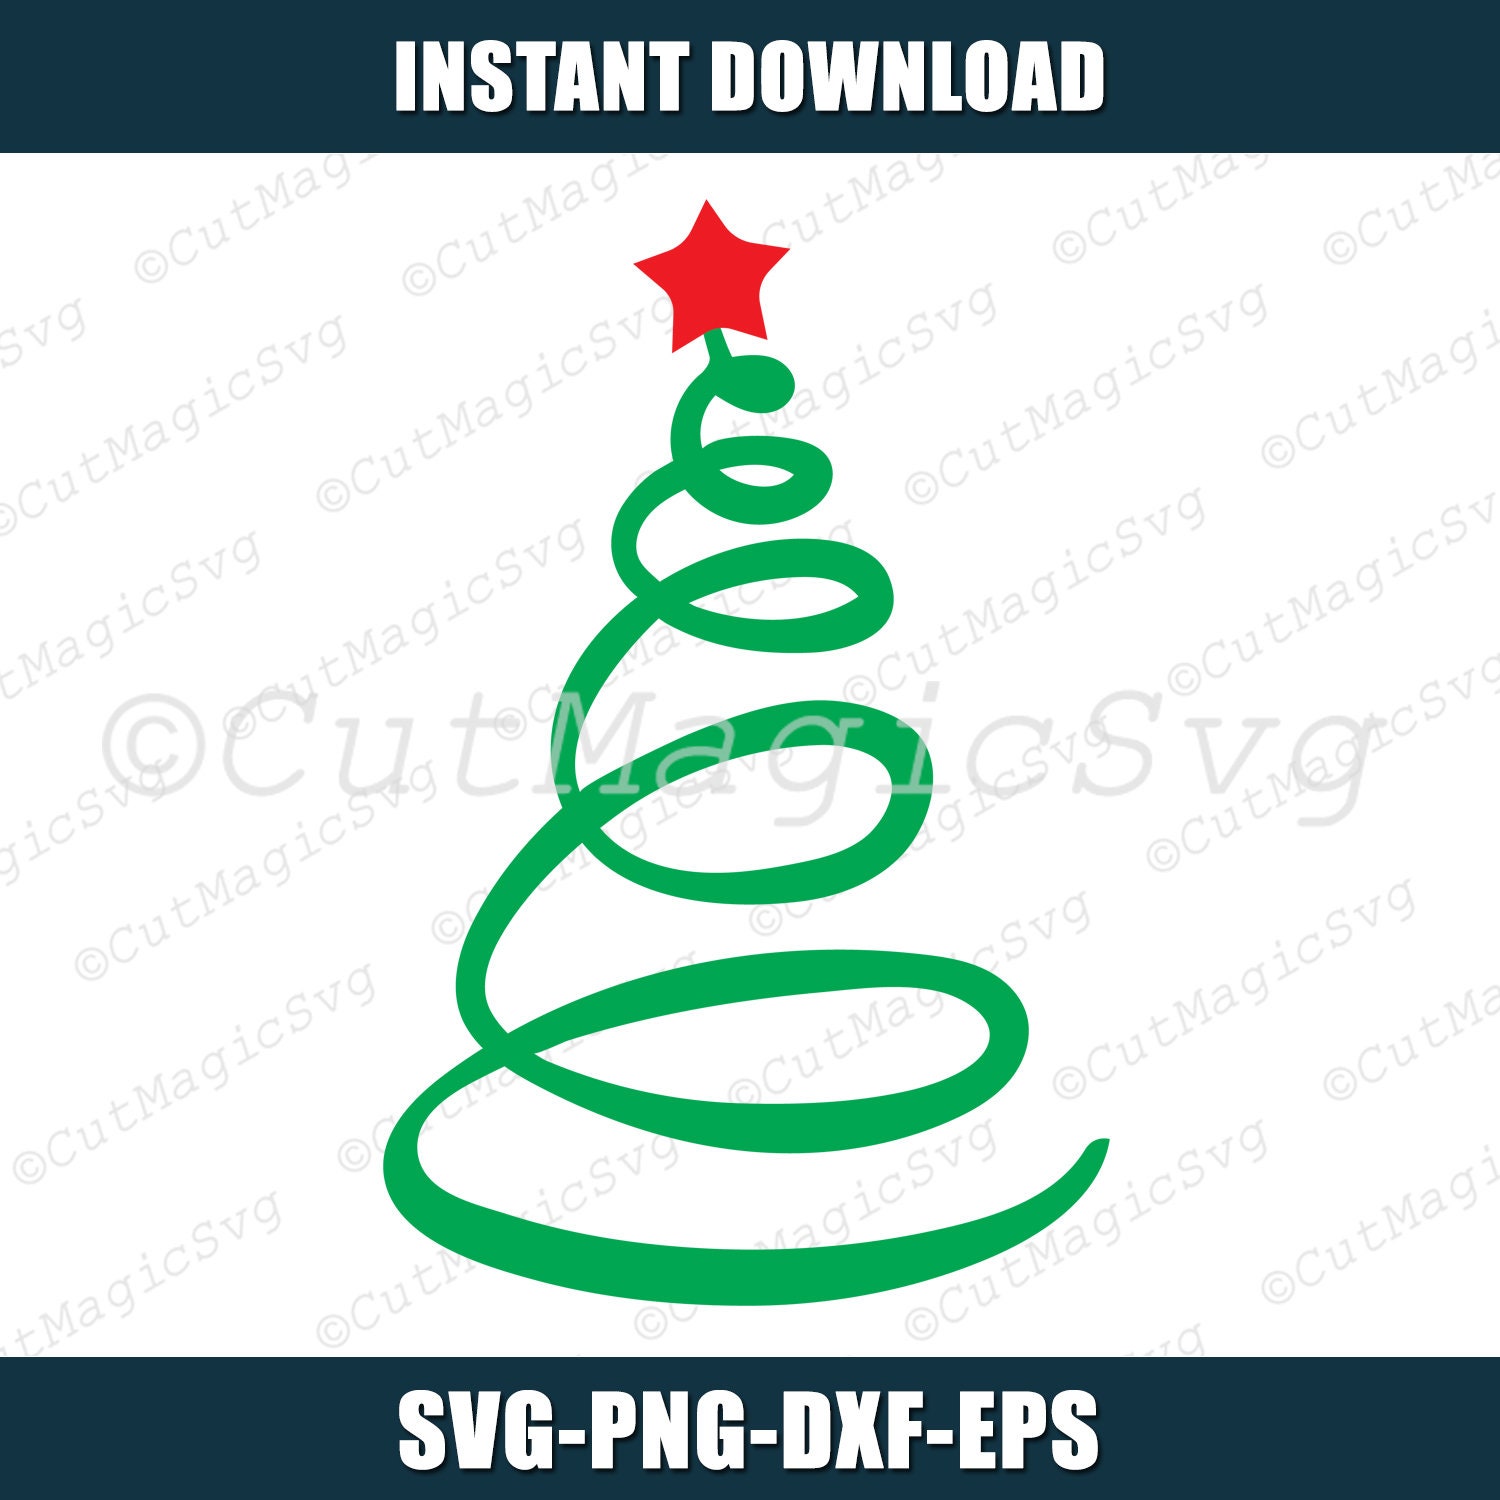 Swirly Christmas Tree SVG instant download svg png dxf | Etsy